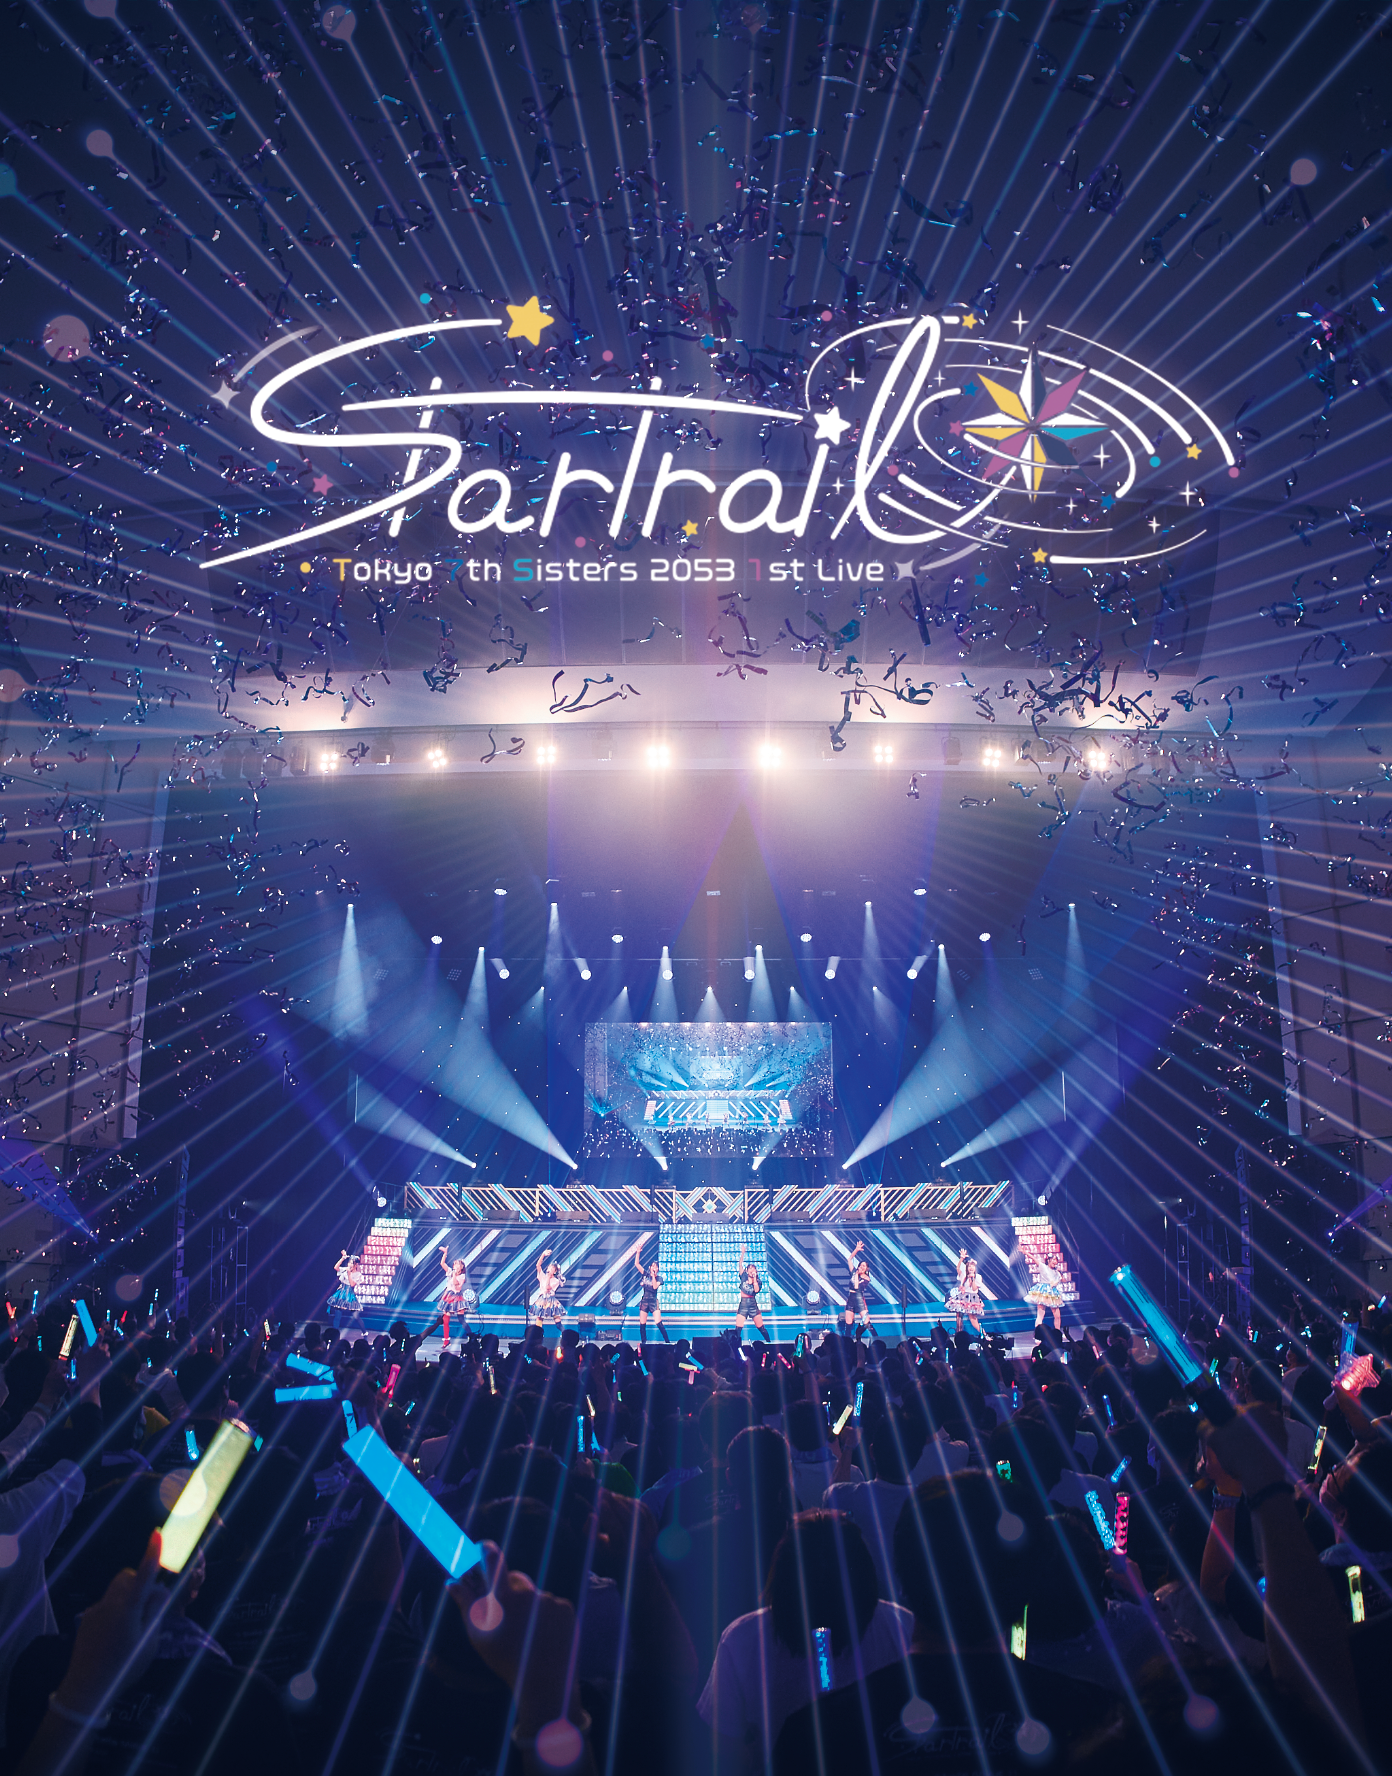 Sisters　Online　[完全生産限定版Blu-ray]　Tokyo　Live　–　シスターズ　Startrail　Official　2053　7th　Tokyo　Store　1st　7th